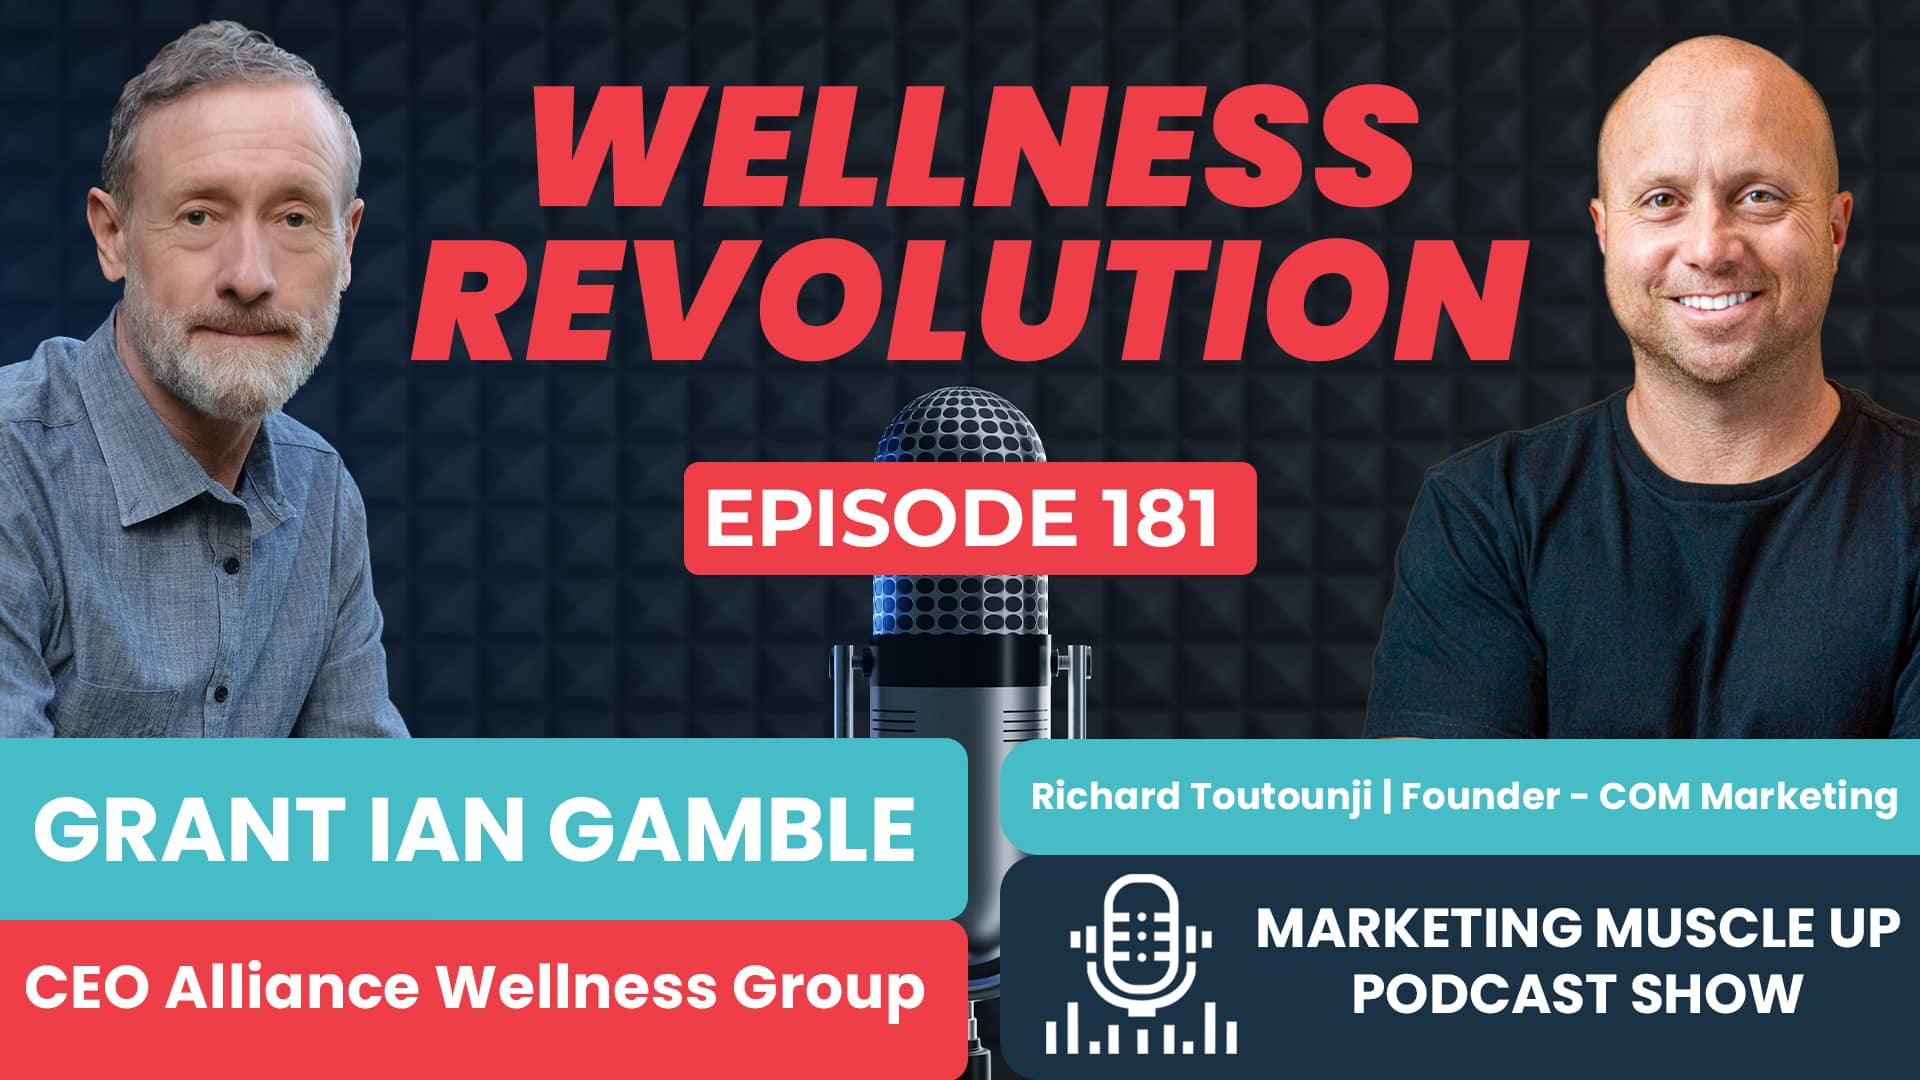 You are currently viewing Ep 181 Wellness Revolution with Grant Ian Gamble